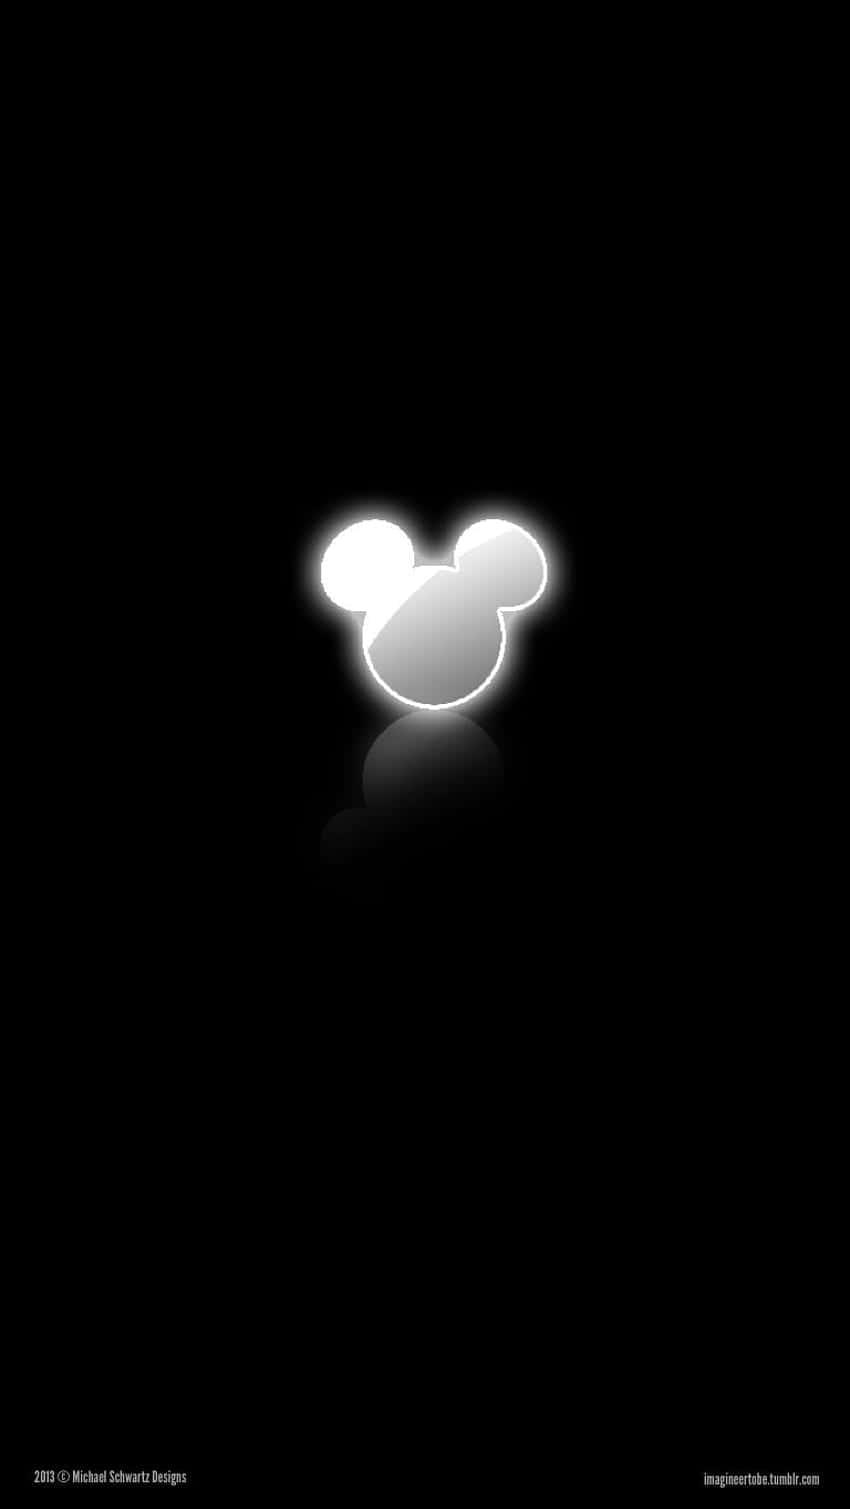 A Mickey Mouse Logo On Black Background Wallpaper